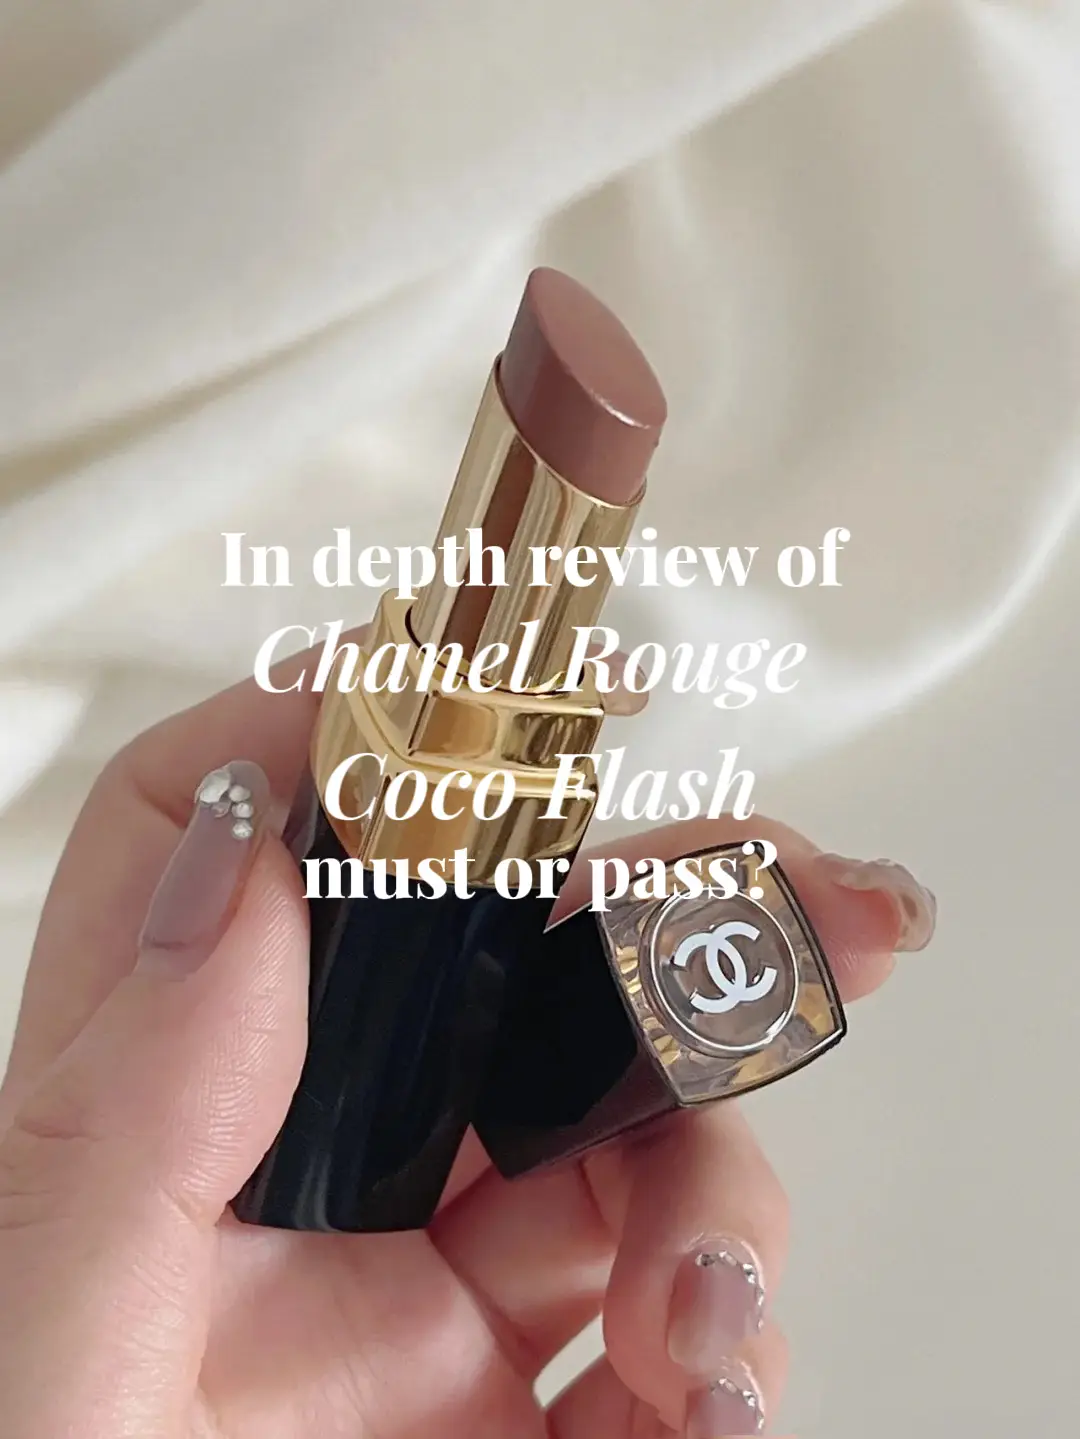 In depth review of Chanel Rouge Coco Flash